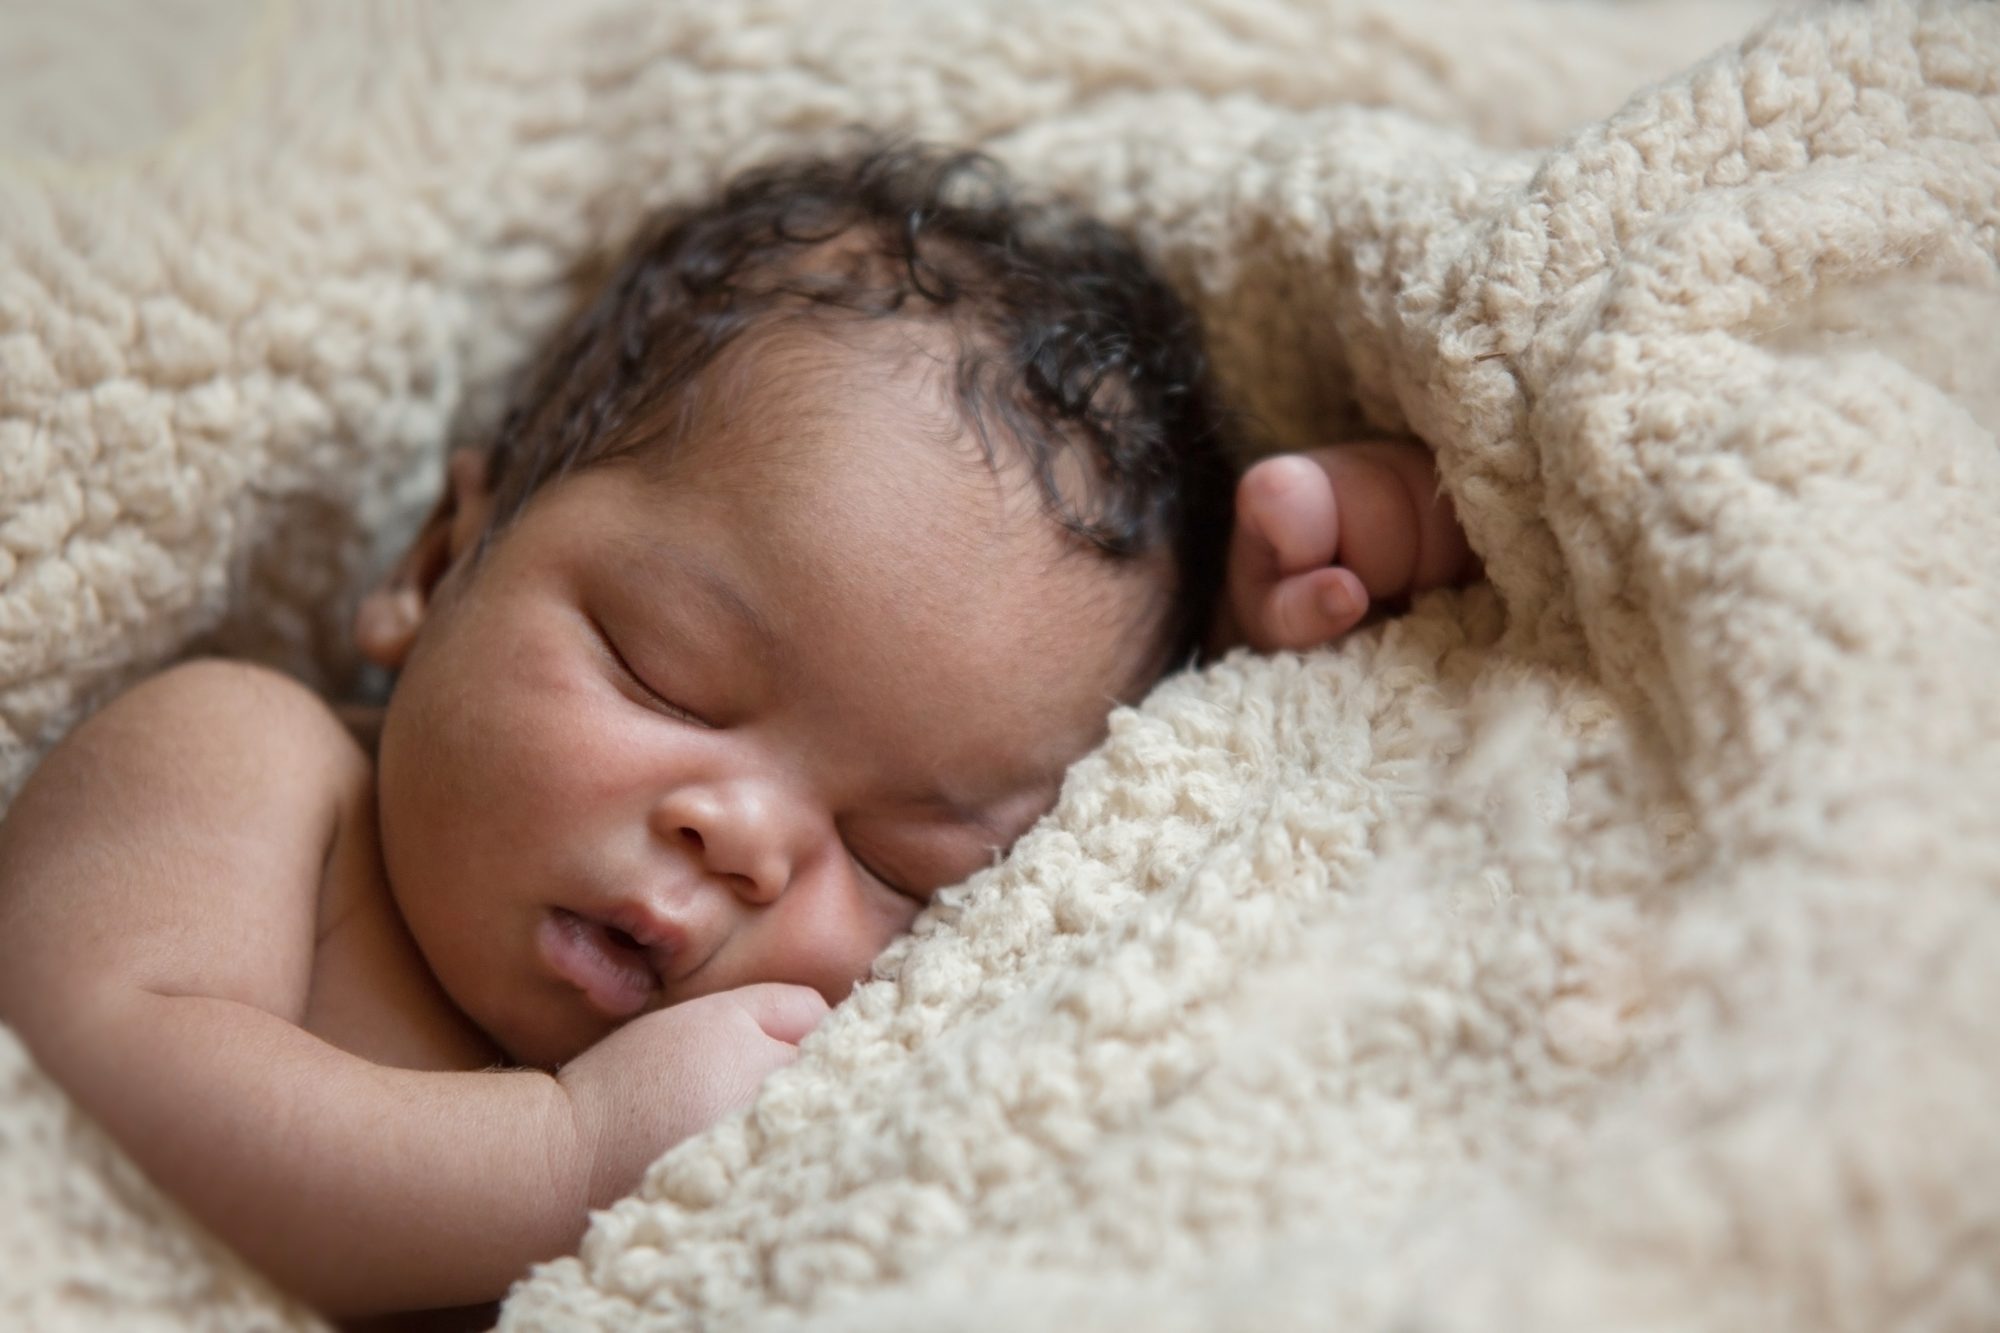 Research On Newborn Babies Shows Inbuilt Ability To Pick Out Words